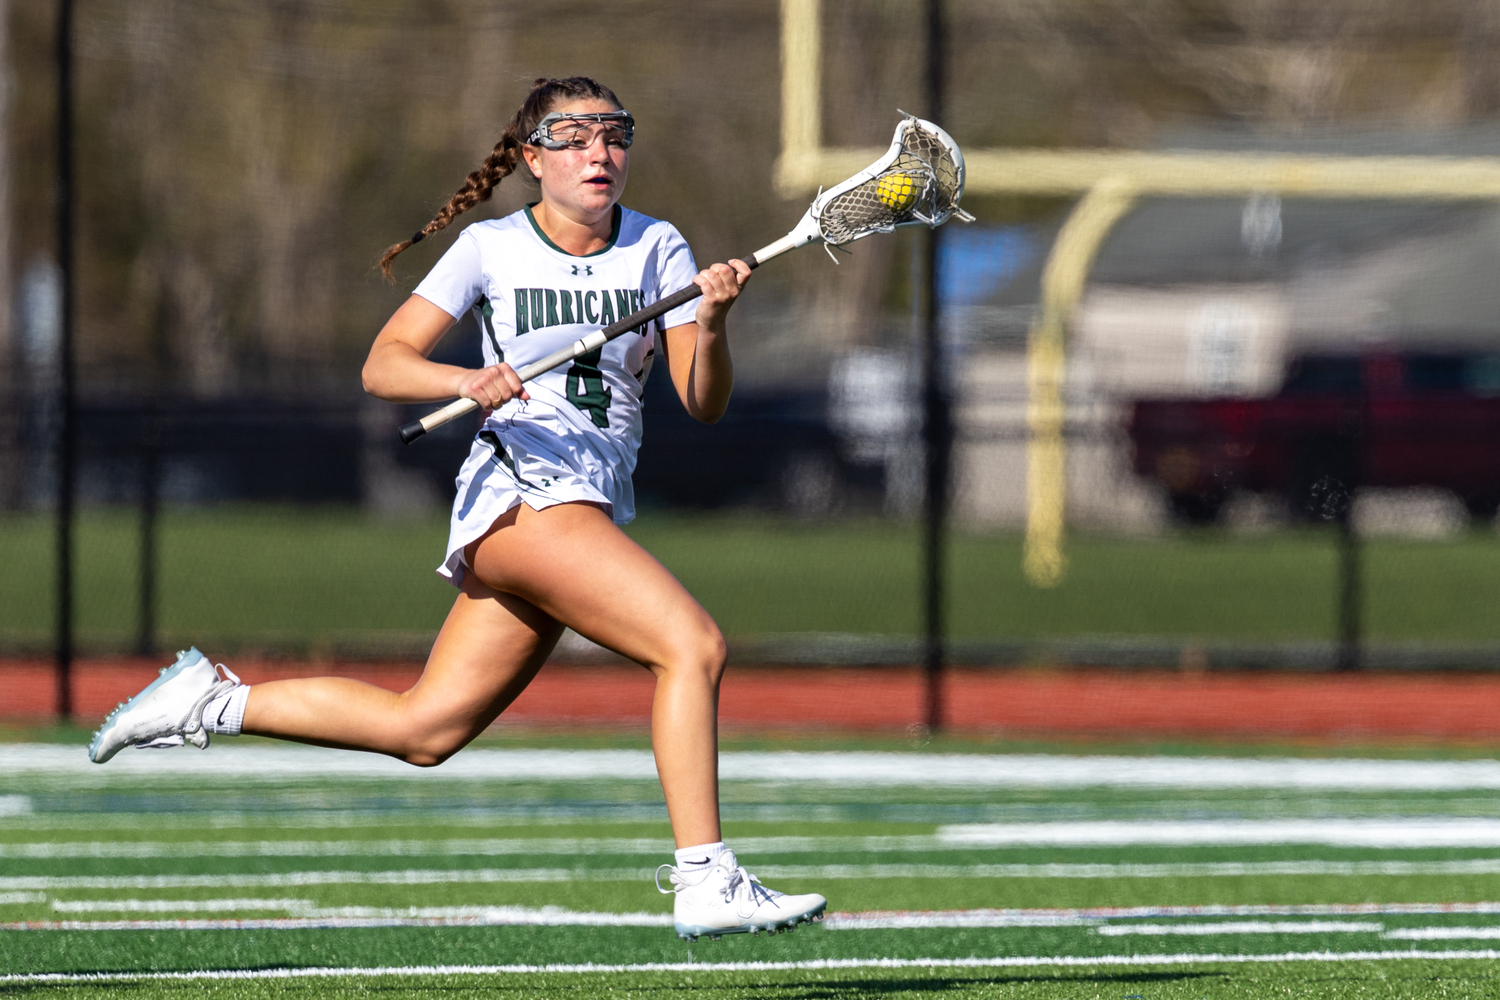 Junior attack Brie Provenzano moves the ball across the field during Westhampton Beach's 11-5 win over Miller Place April 24. RON ESPOSITO